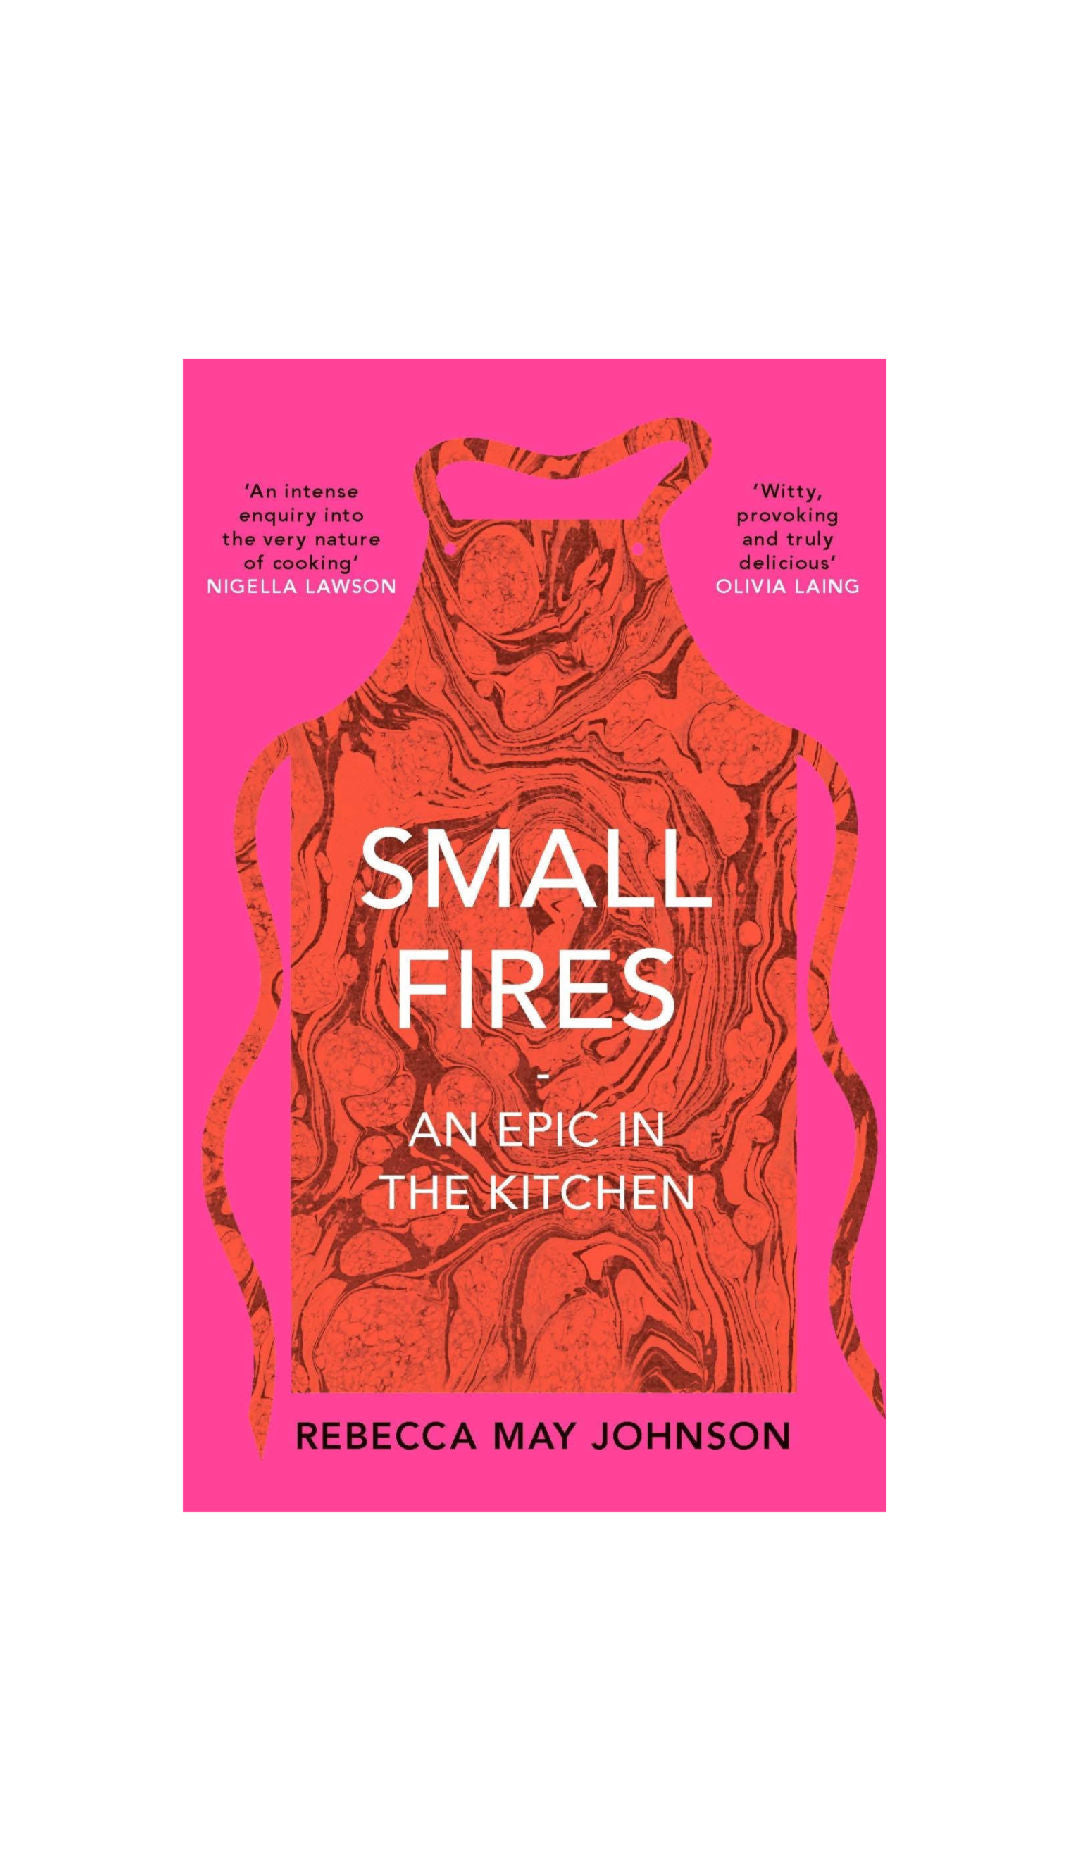 Small Fires: An Epic In the Kitchen / PAPERBACK COMING APRIL 9TH!